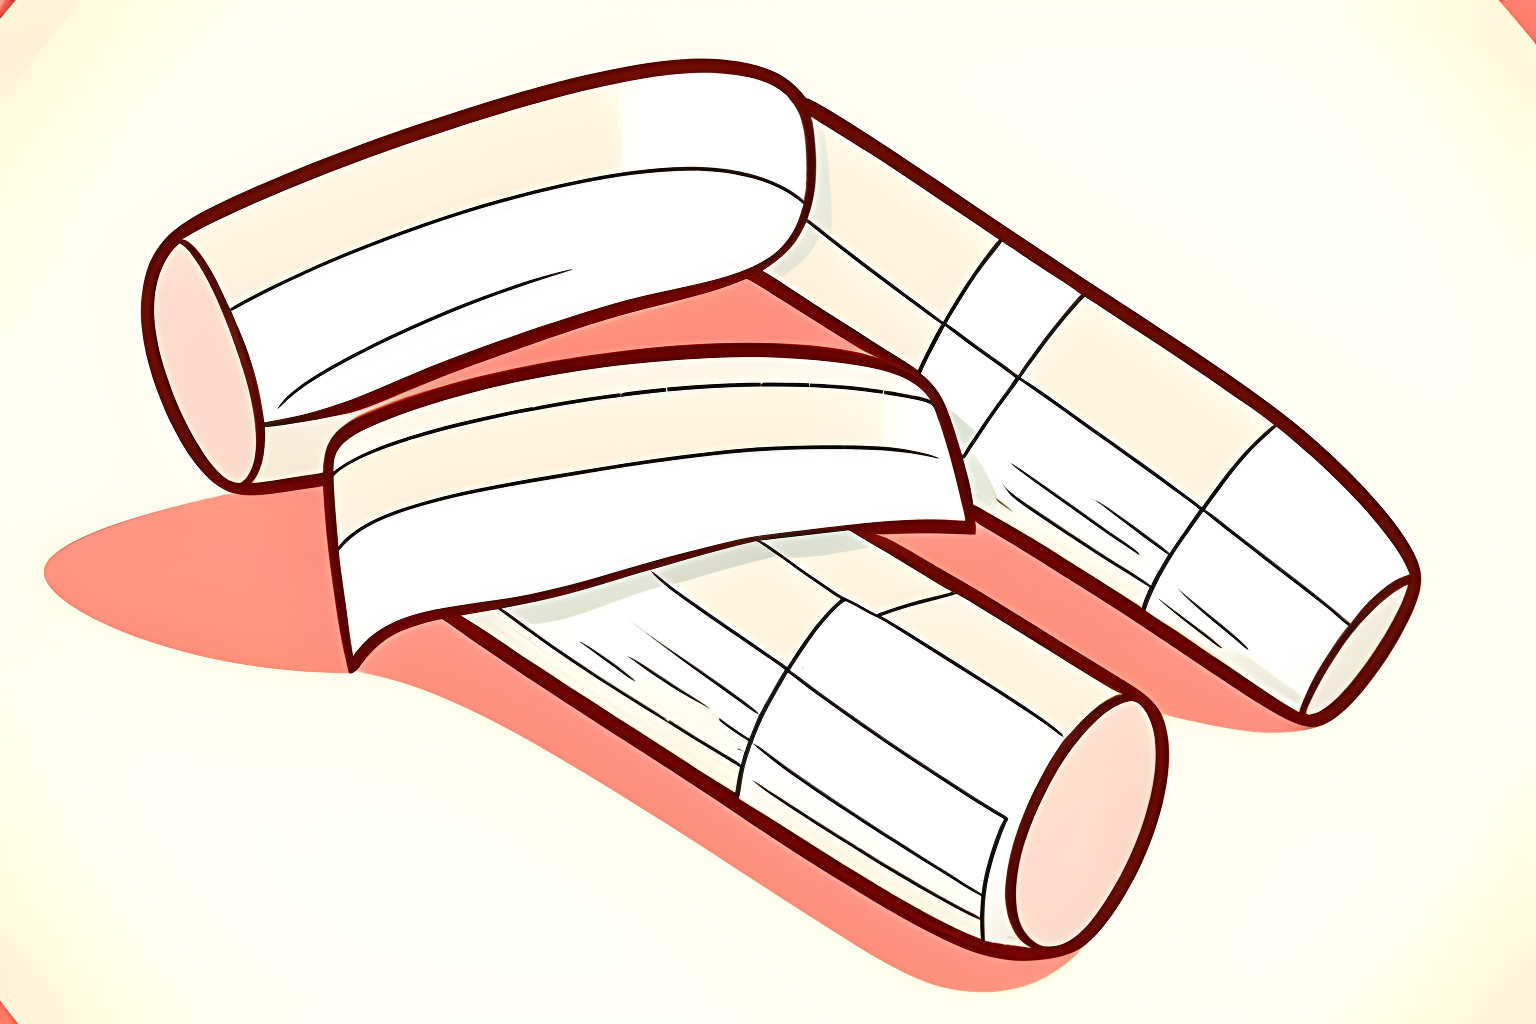 bandages on a piece of paper cartoonish